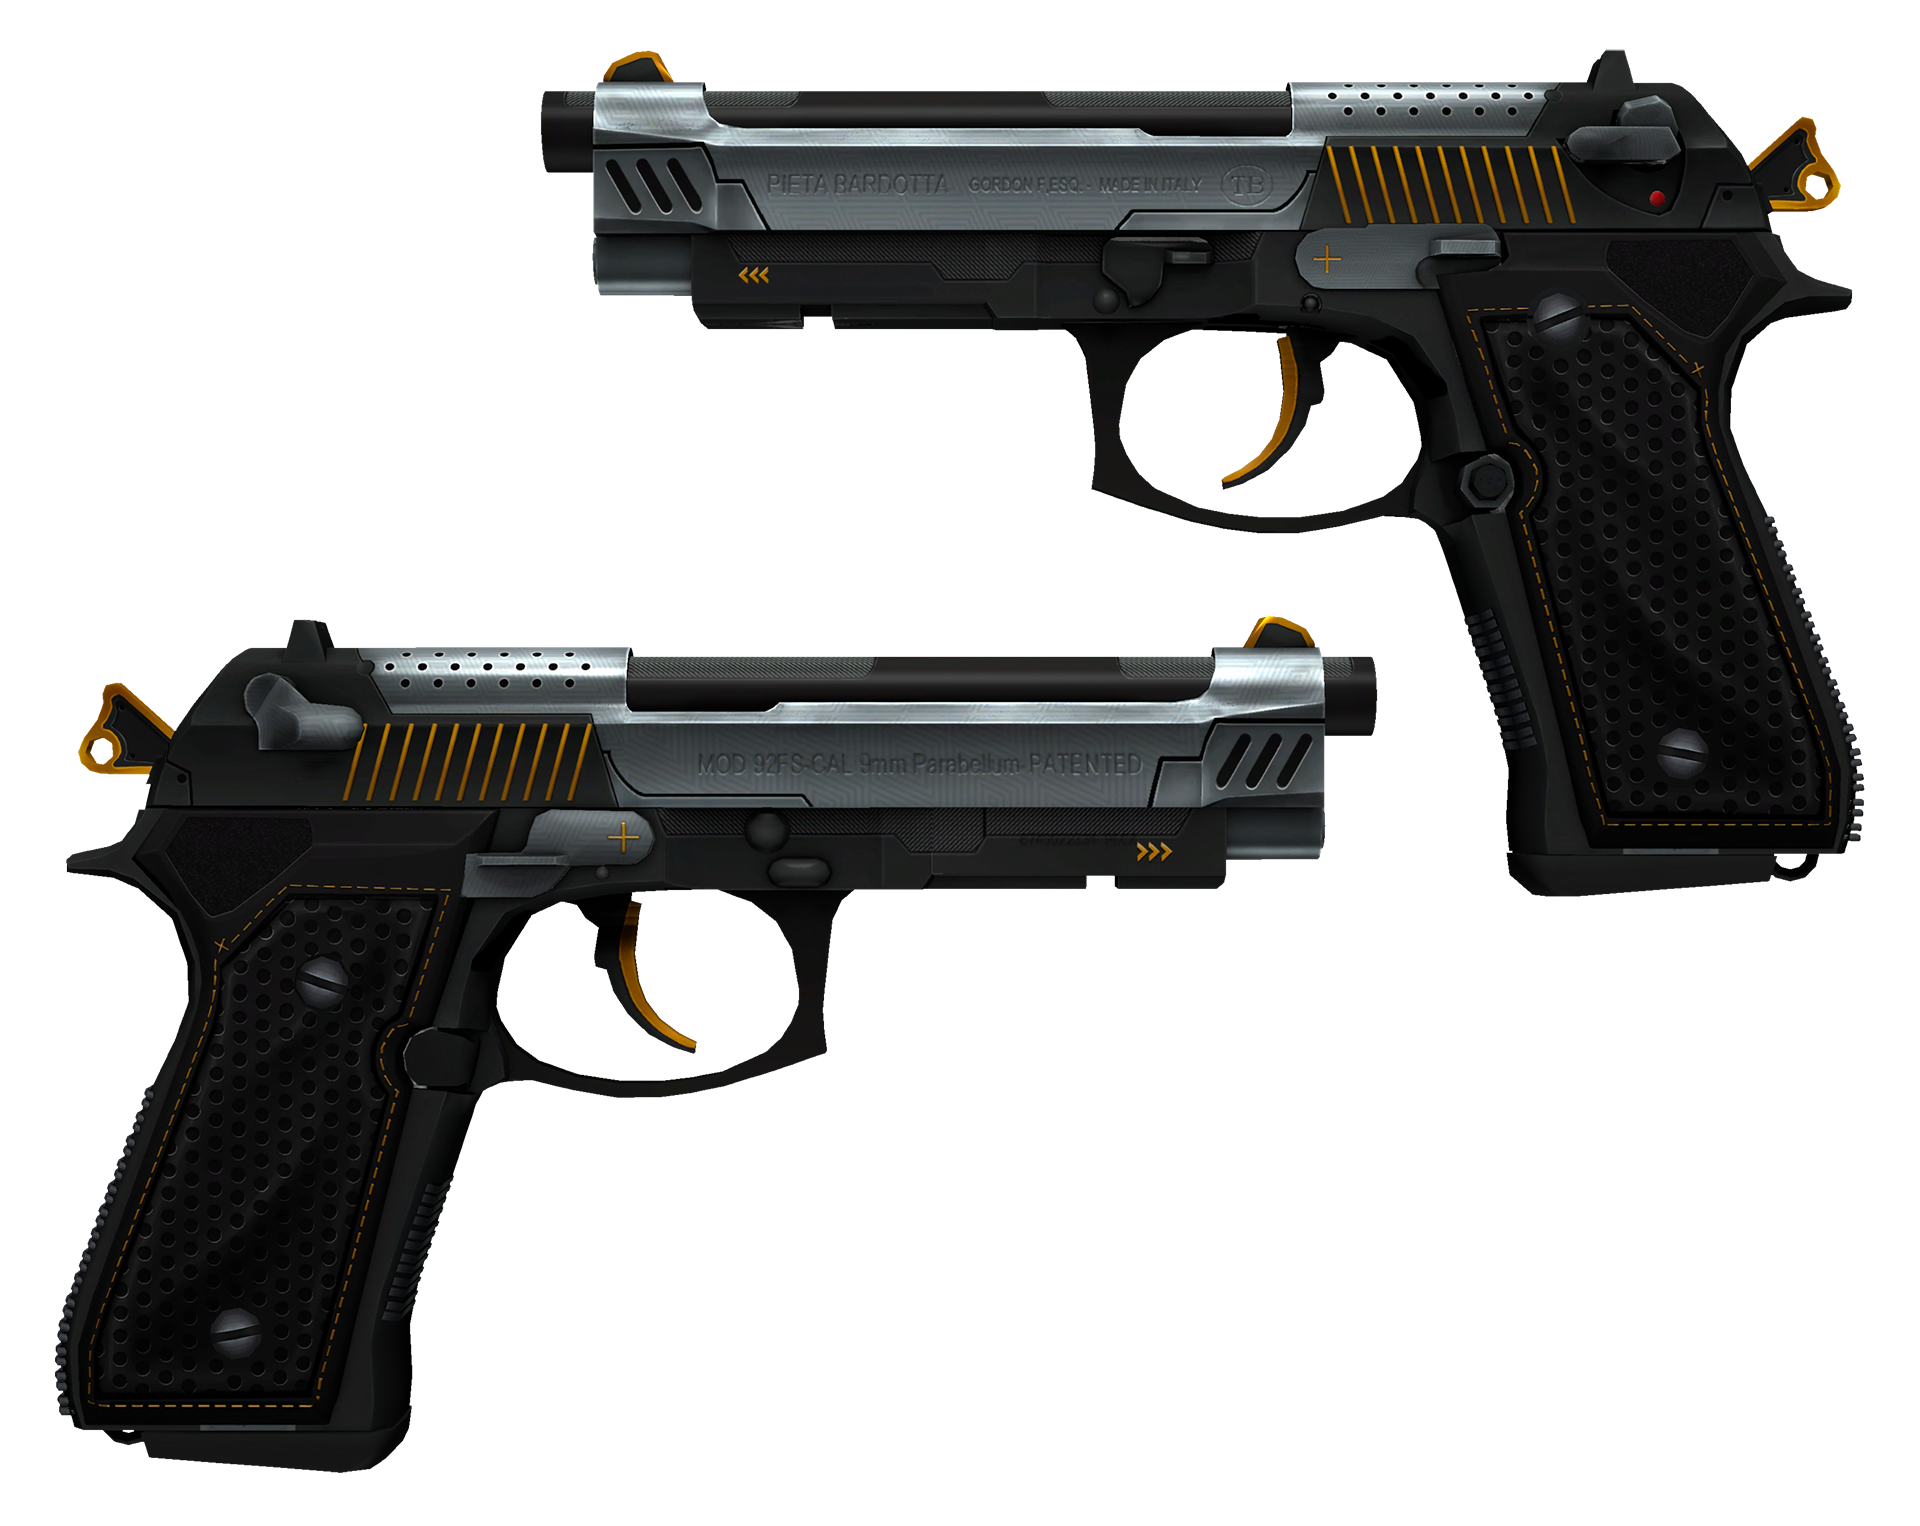 Dual Berettas Stained cs go skin download